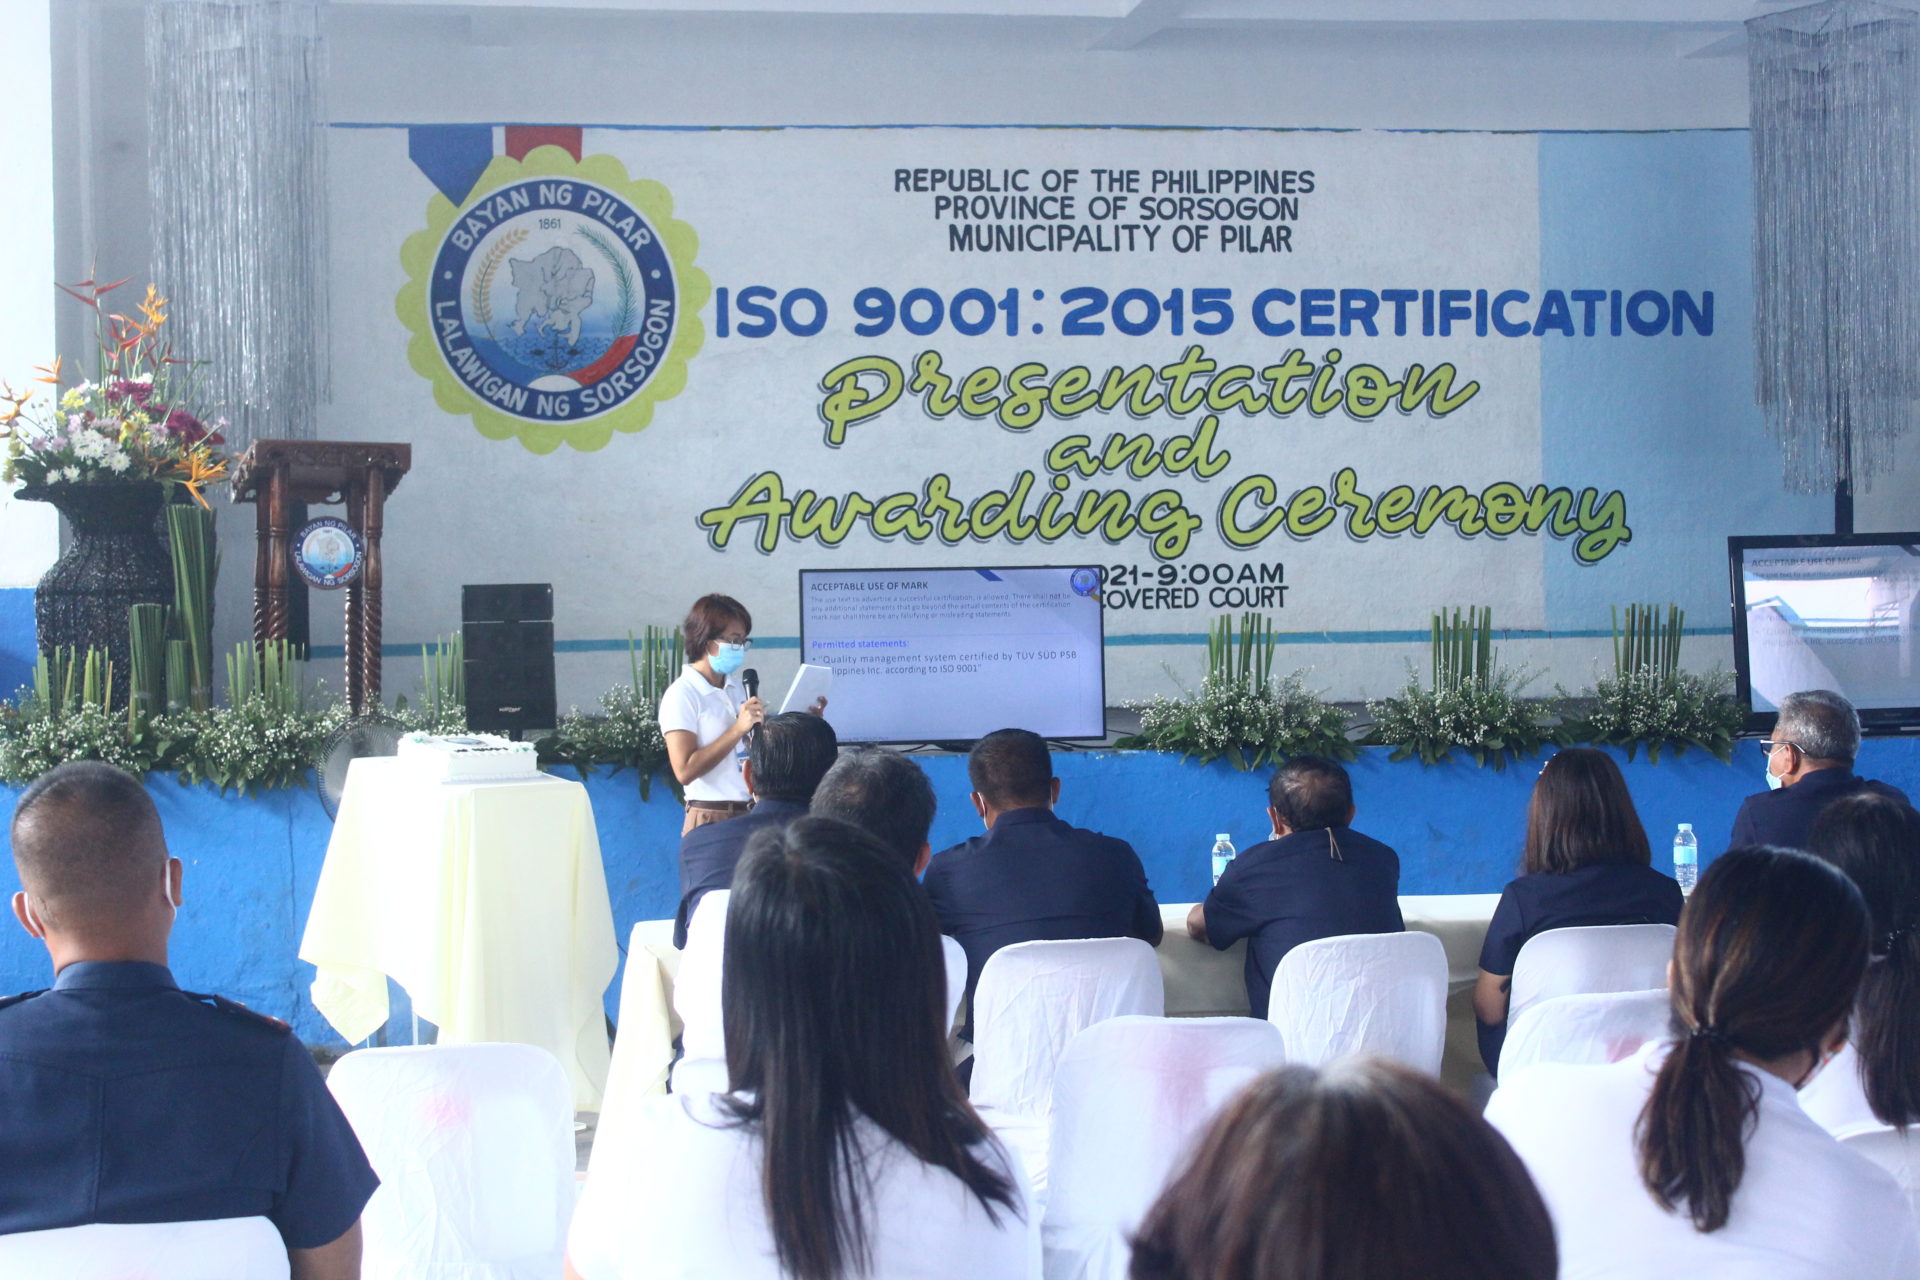 ISO 9001:2015 CERTIFICATION Presentation and Awarding Ceremony